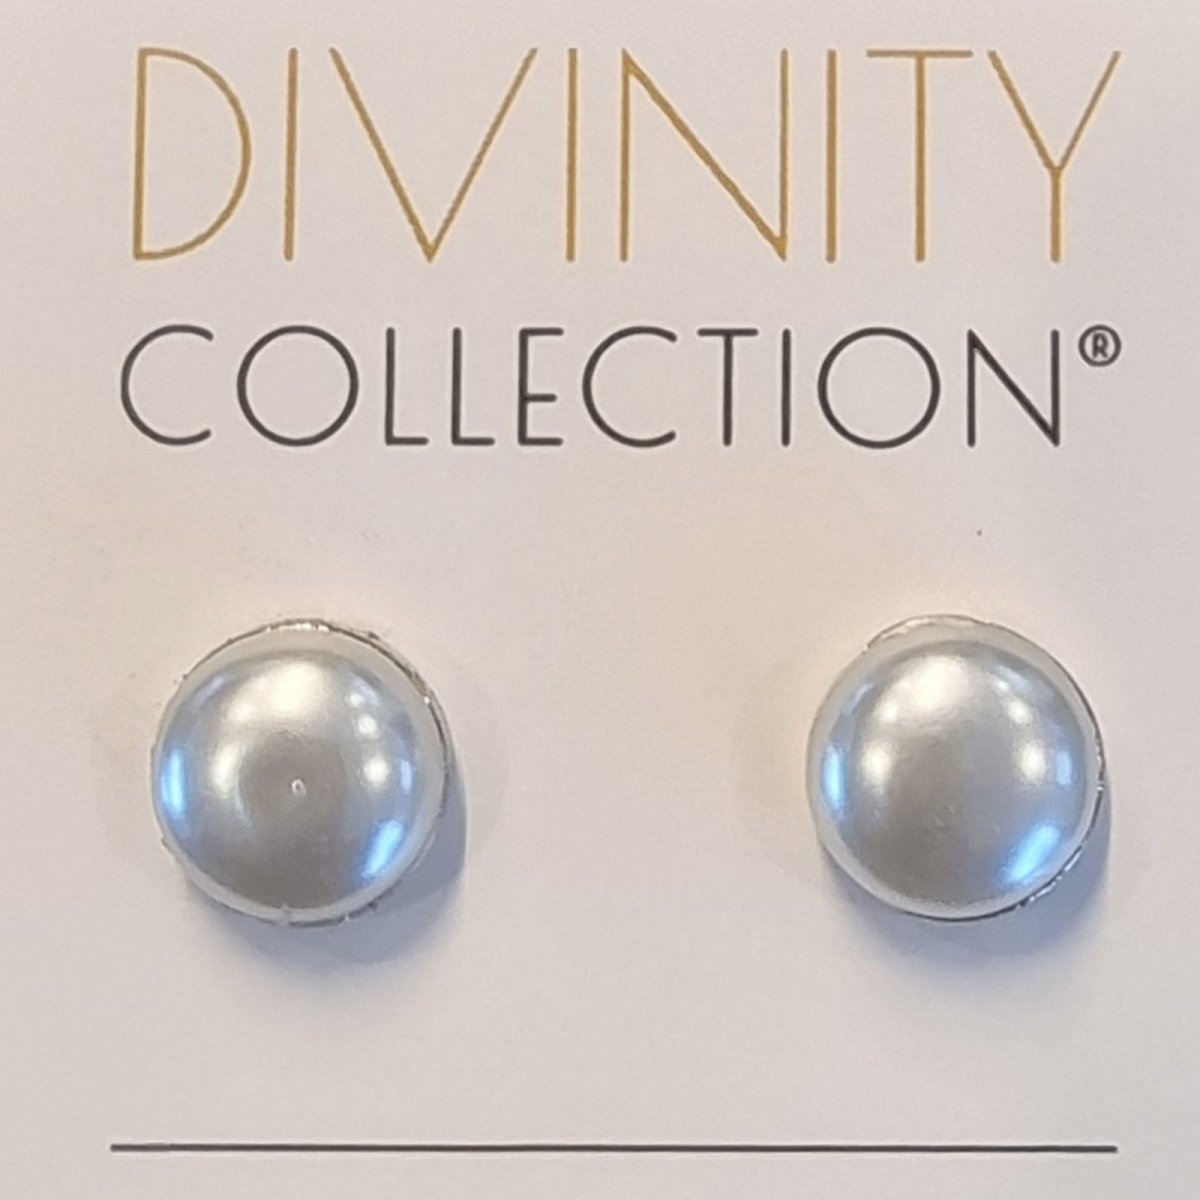 2 Pairs Small White Magnetic Hijab Pearl Pins (4Pcs) - Divinity Collection